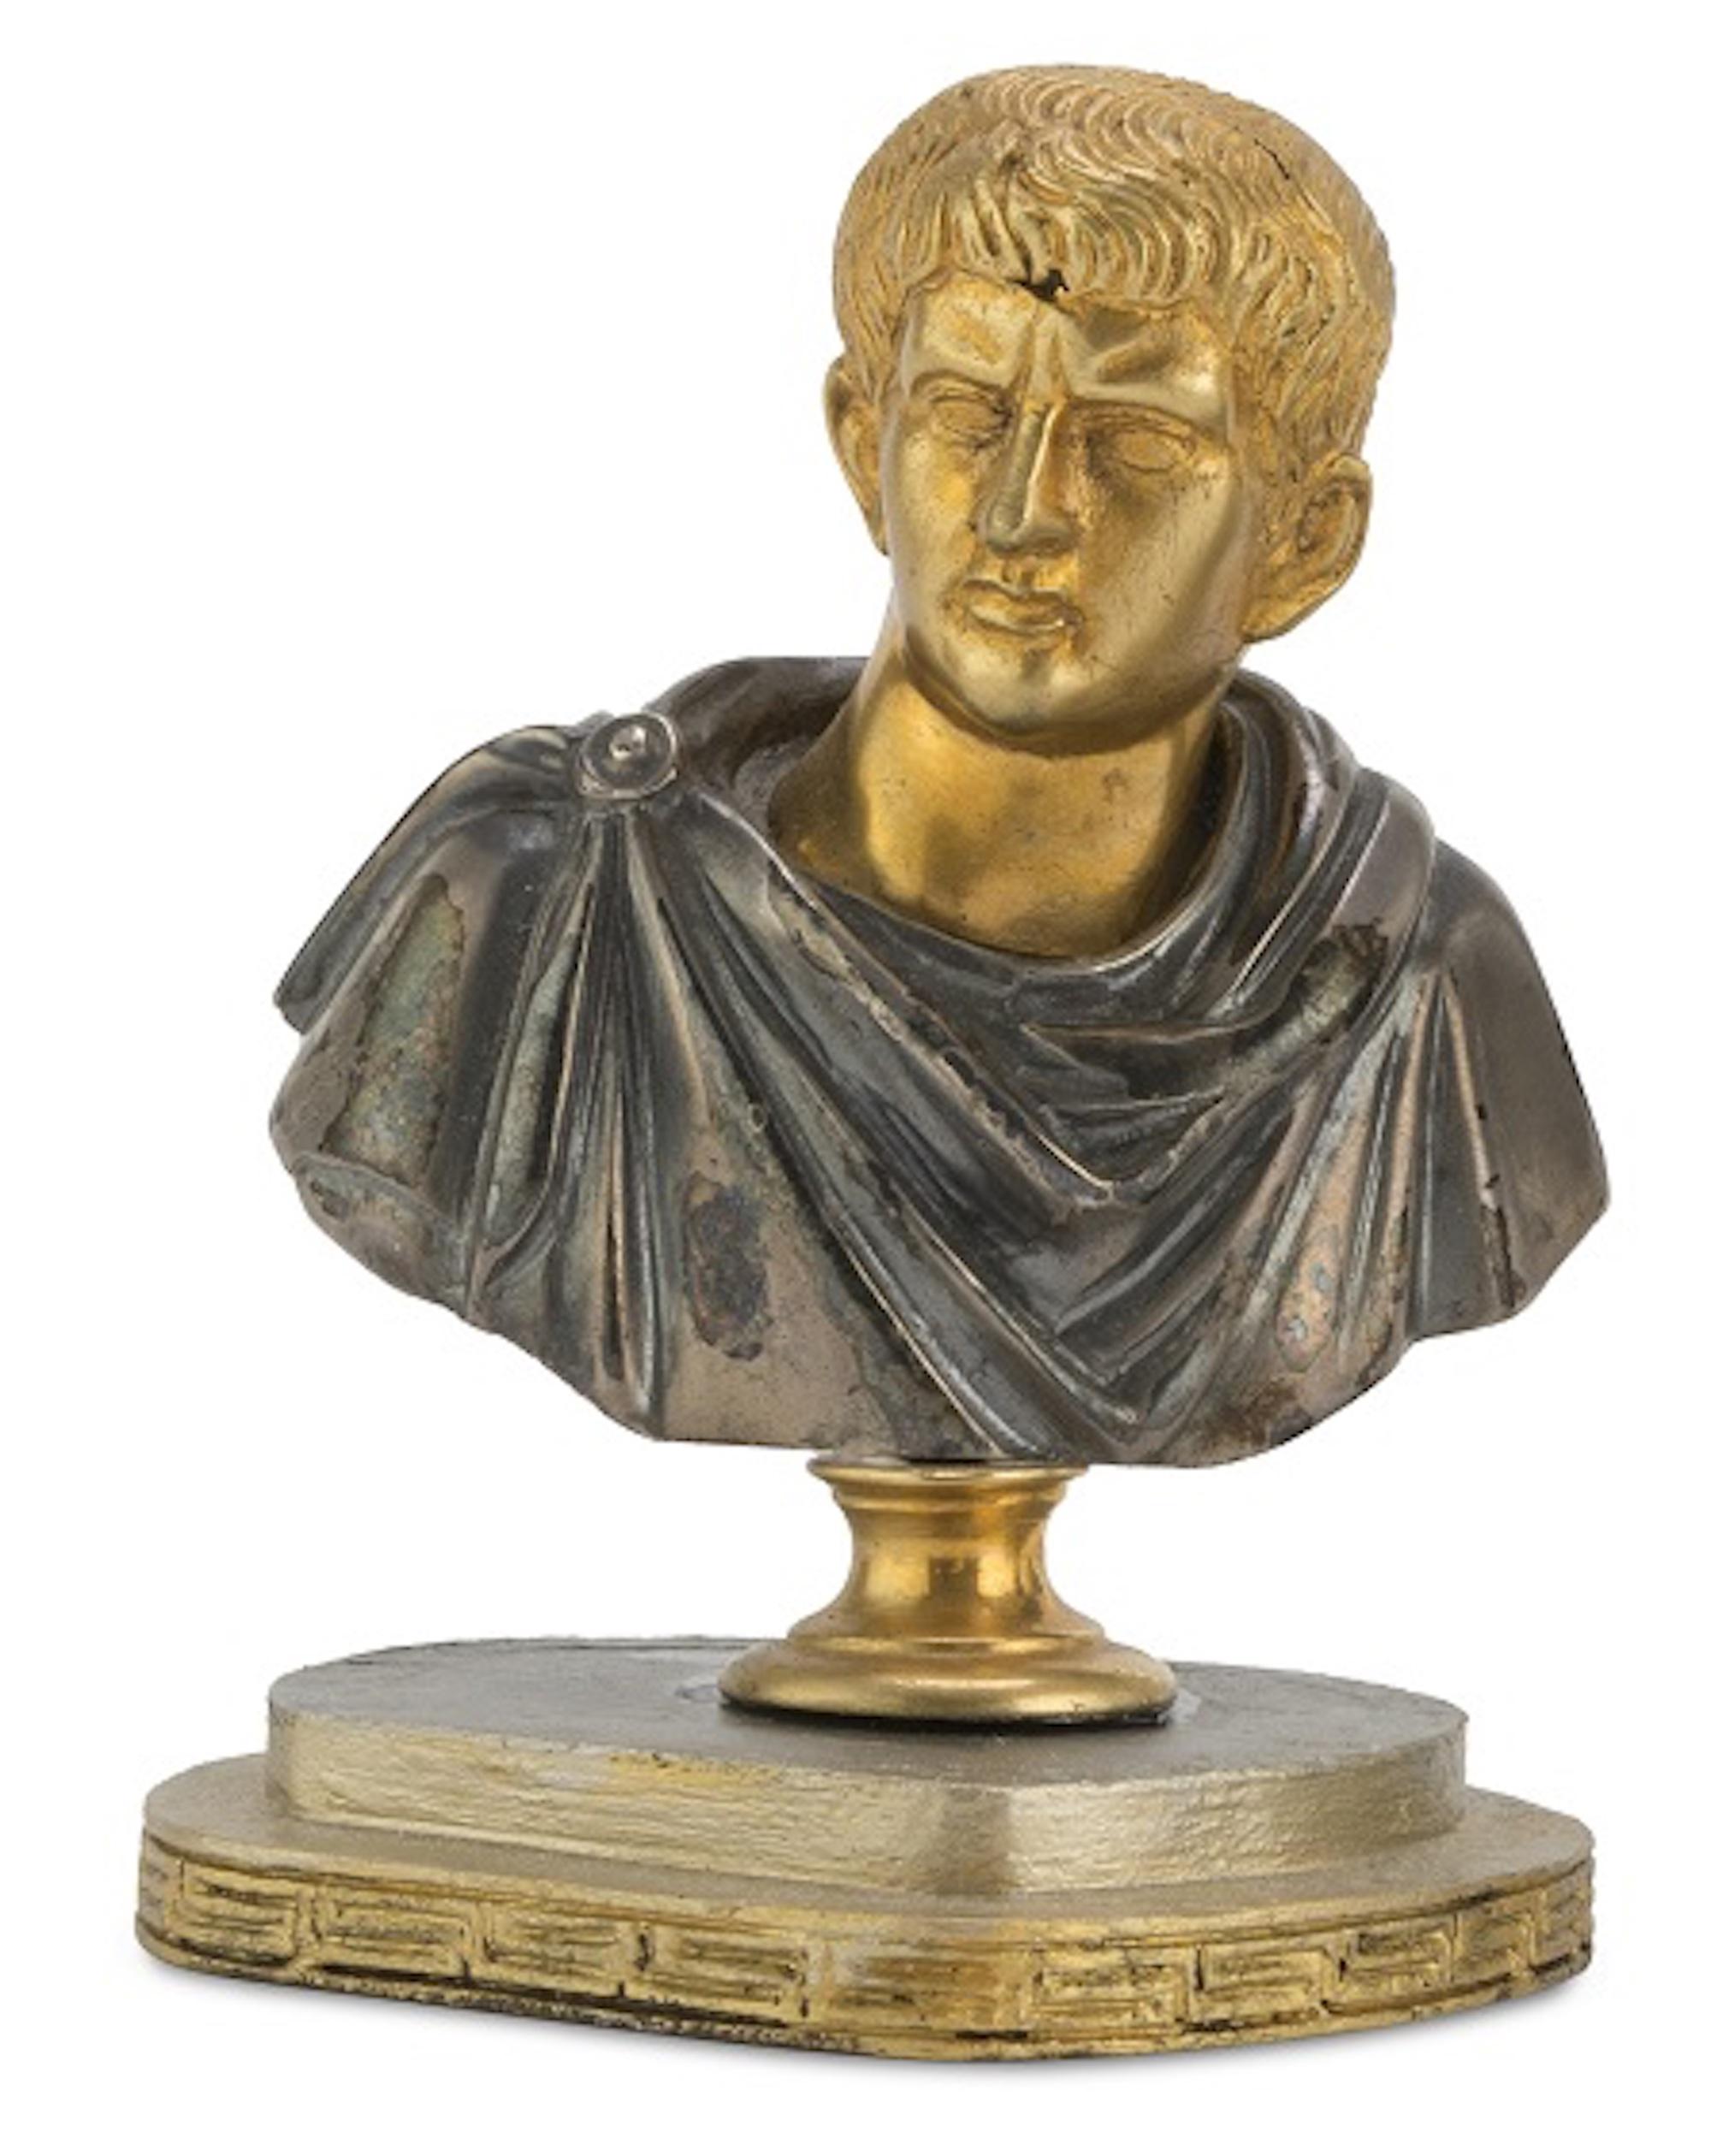 Pair of bronze busts is an original work realized in Italy in the beginning of the 19th century.

Bronze and wood. 

Moulded edges bases.

Fair conditions.

Beautiful pair of busts representing two Roman imperators realized in bronze and